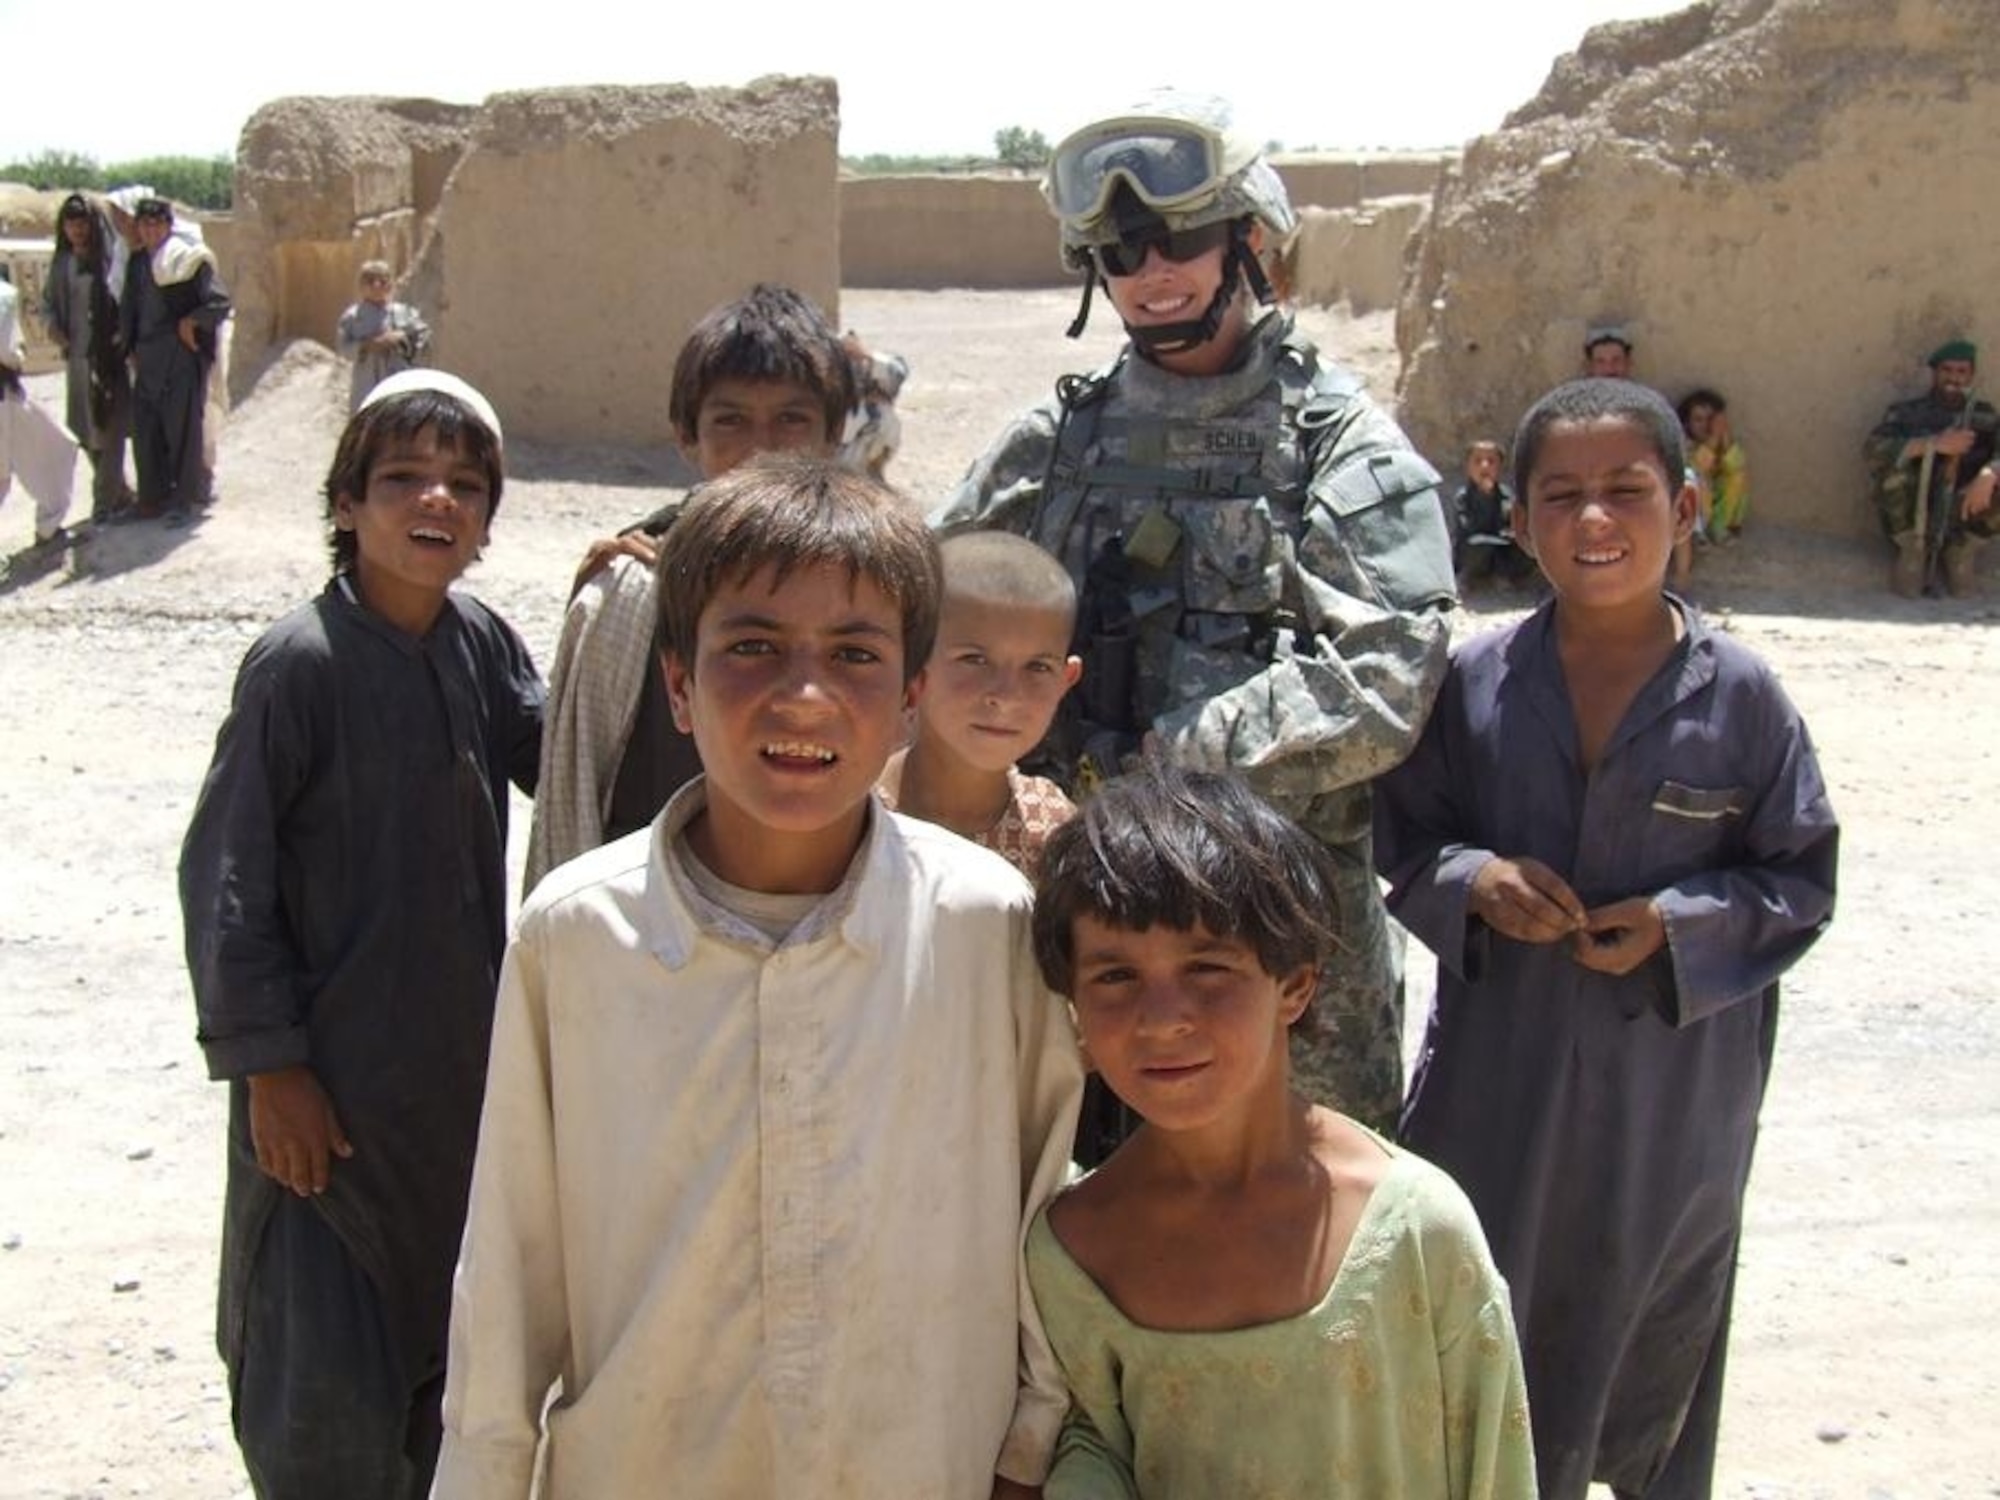 Staff Sgt. Trisha Scheu with some local children during her recent deployment to Afghanistan on an "in lieu of" assignment augmenting Army troops. (U.S. Air Force photo courtesy of Staff Sgt. Trisha Scheu